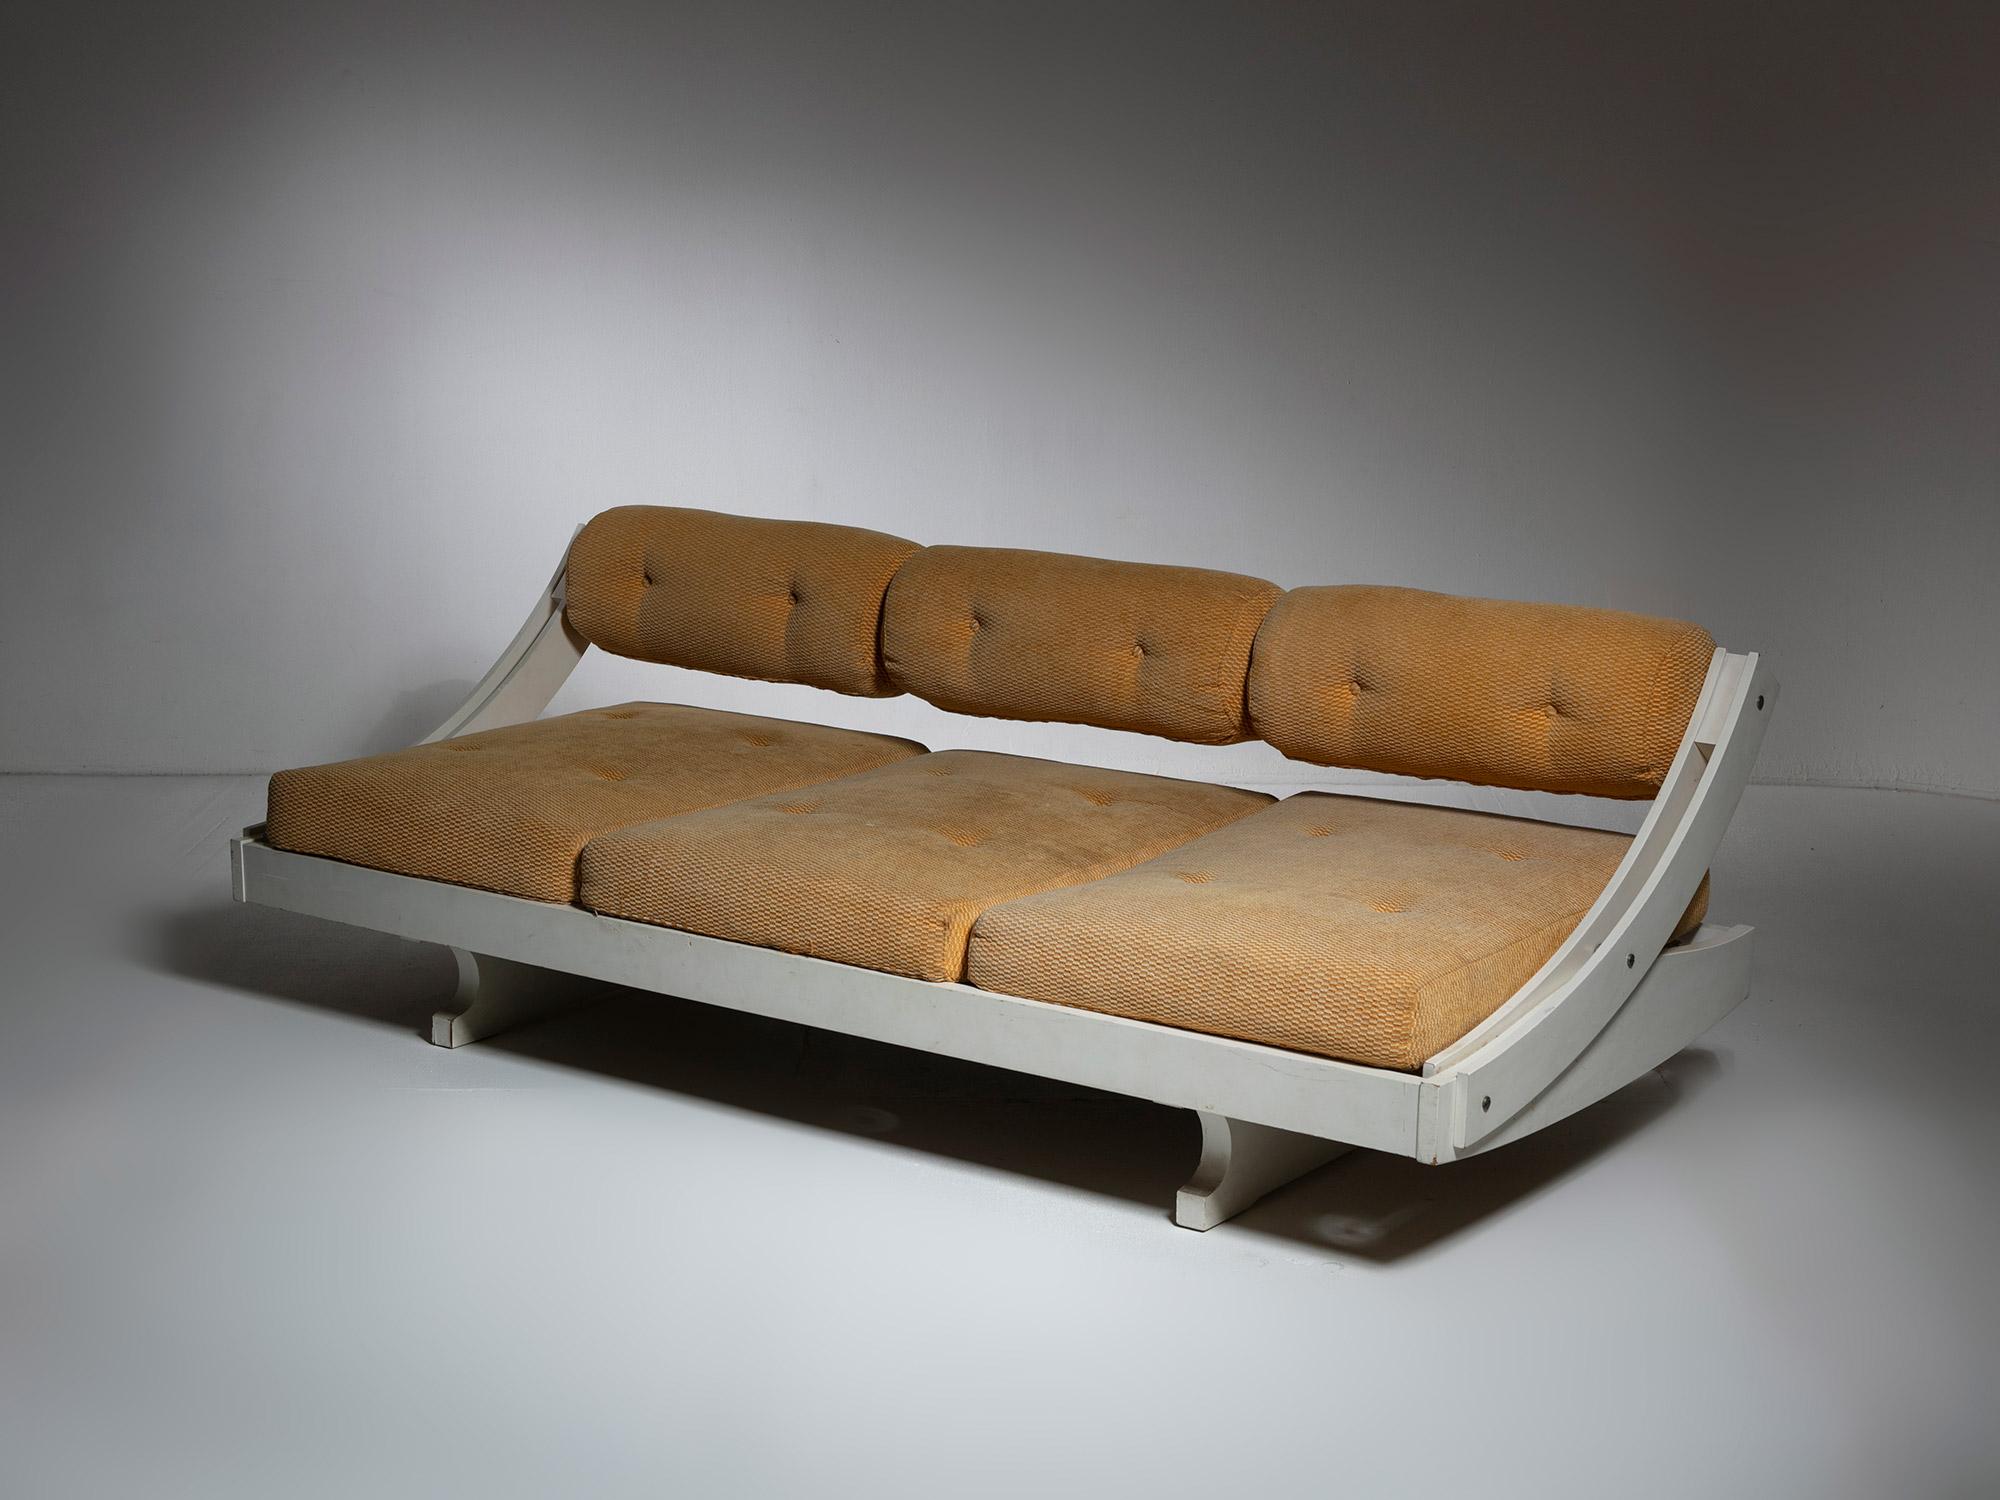 Rare white daybed by Gianni Songia for Sormani.
Sliding backrest allows to transform it as a comfortable single bed.